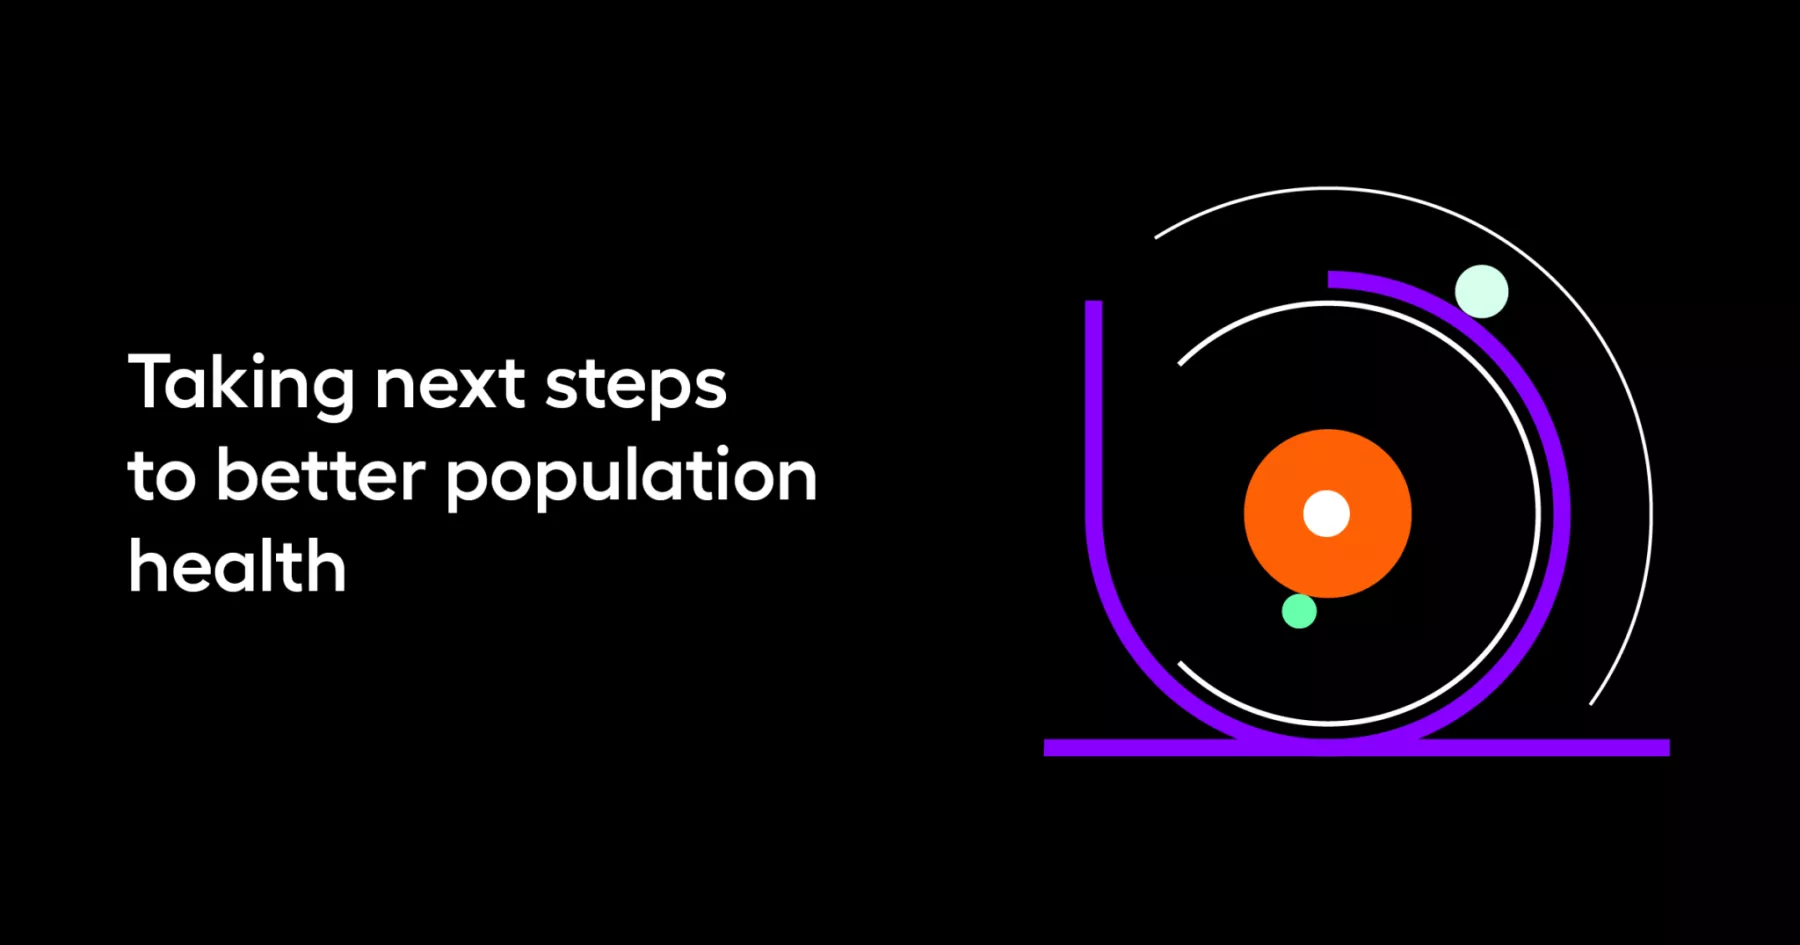 Taking-next-steps-to-better-population-health-2048x1075